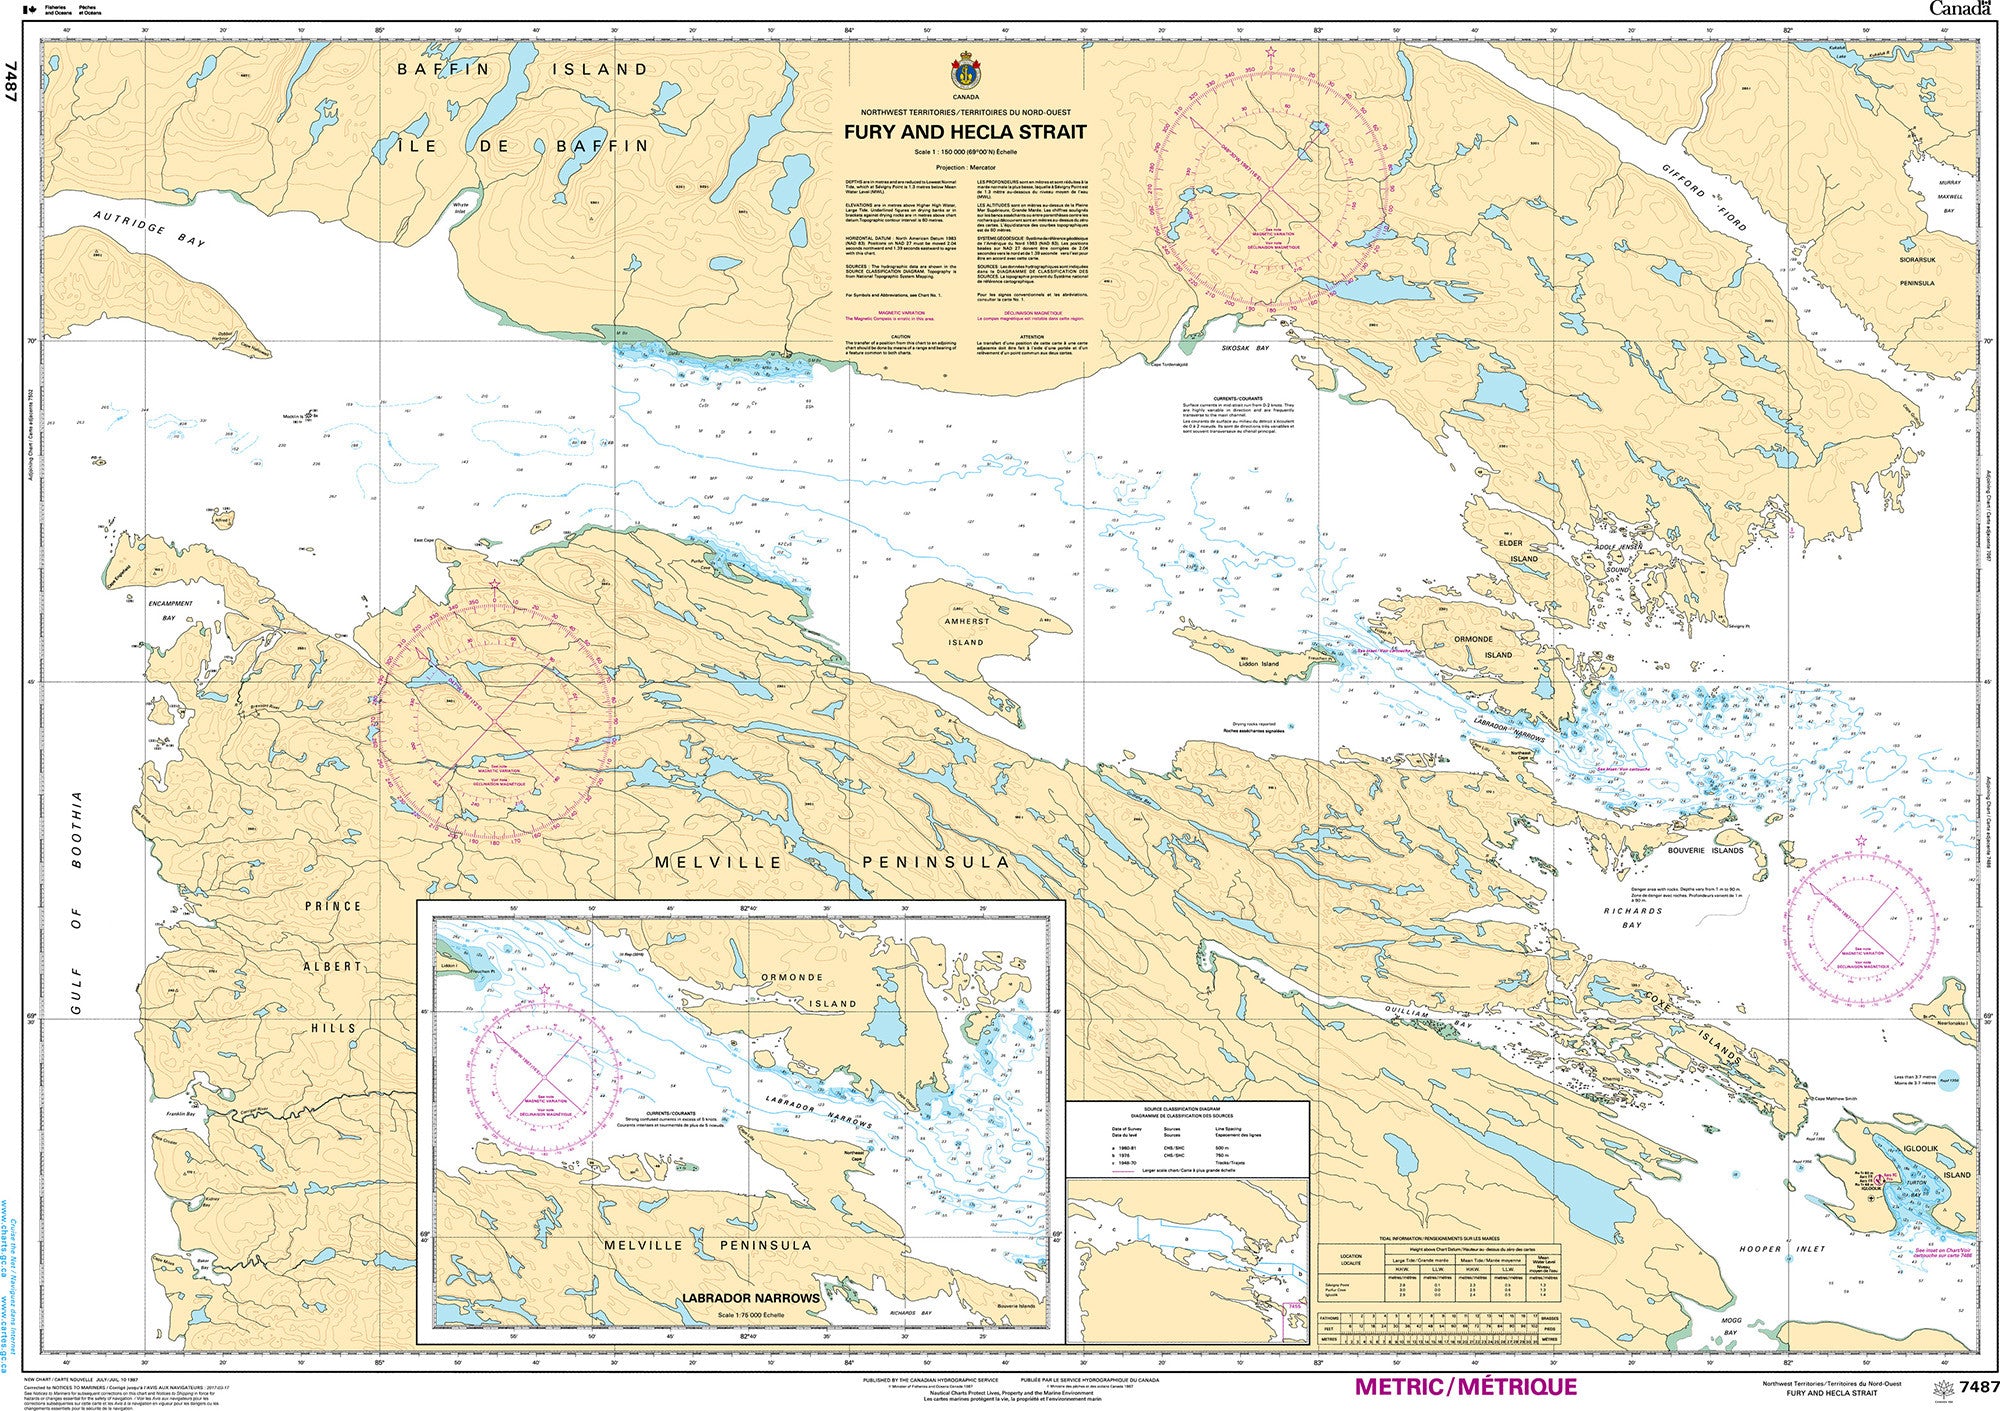 Canadian Hydrographic Service Nautical Chart CHS7487: Fury and Hecla Strait